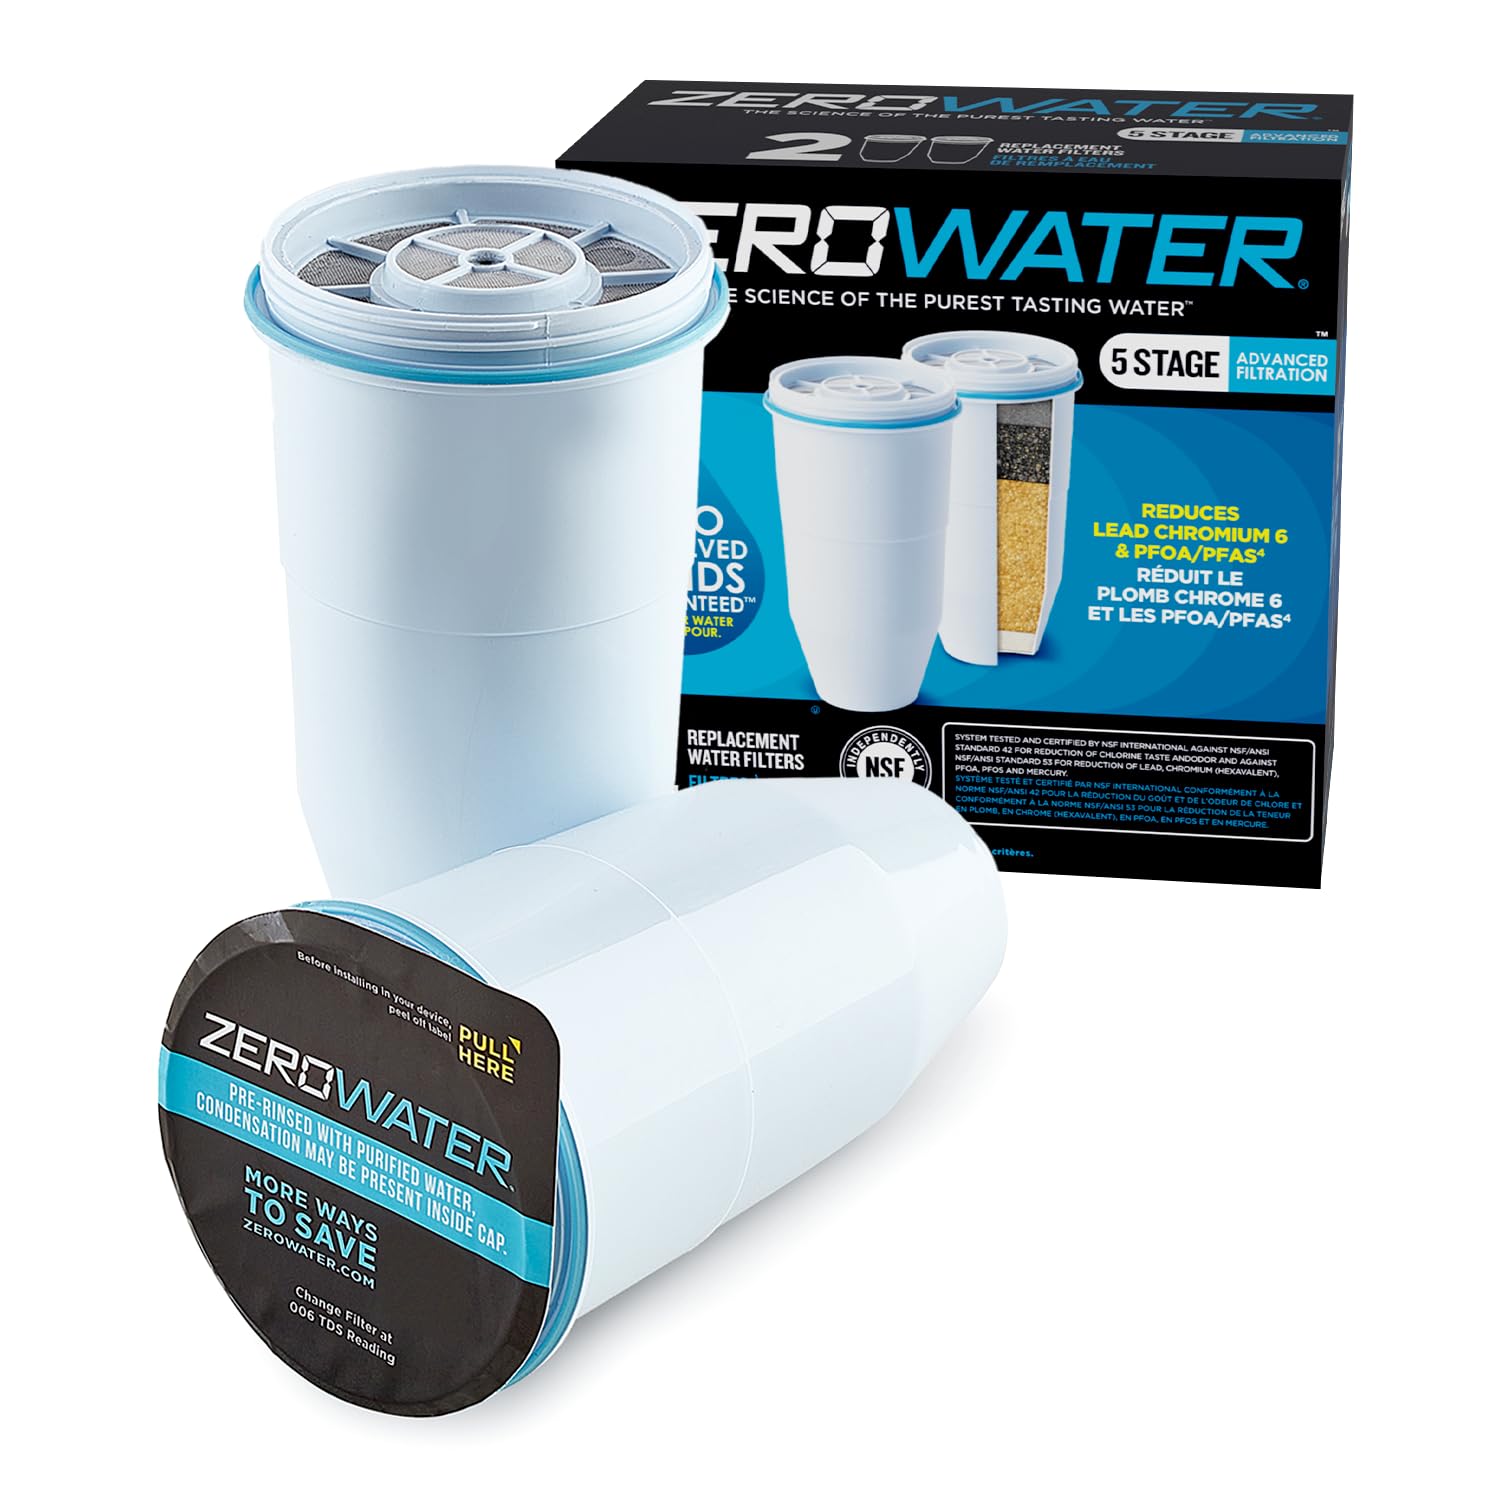 ZeroWater water filter Replacement, NSF Certified to Reduce Lead, Other Heavy Metals and PFOA/PFOS,